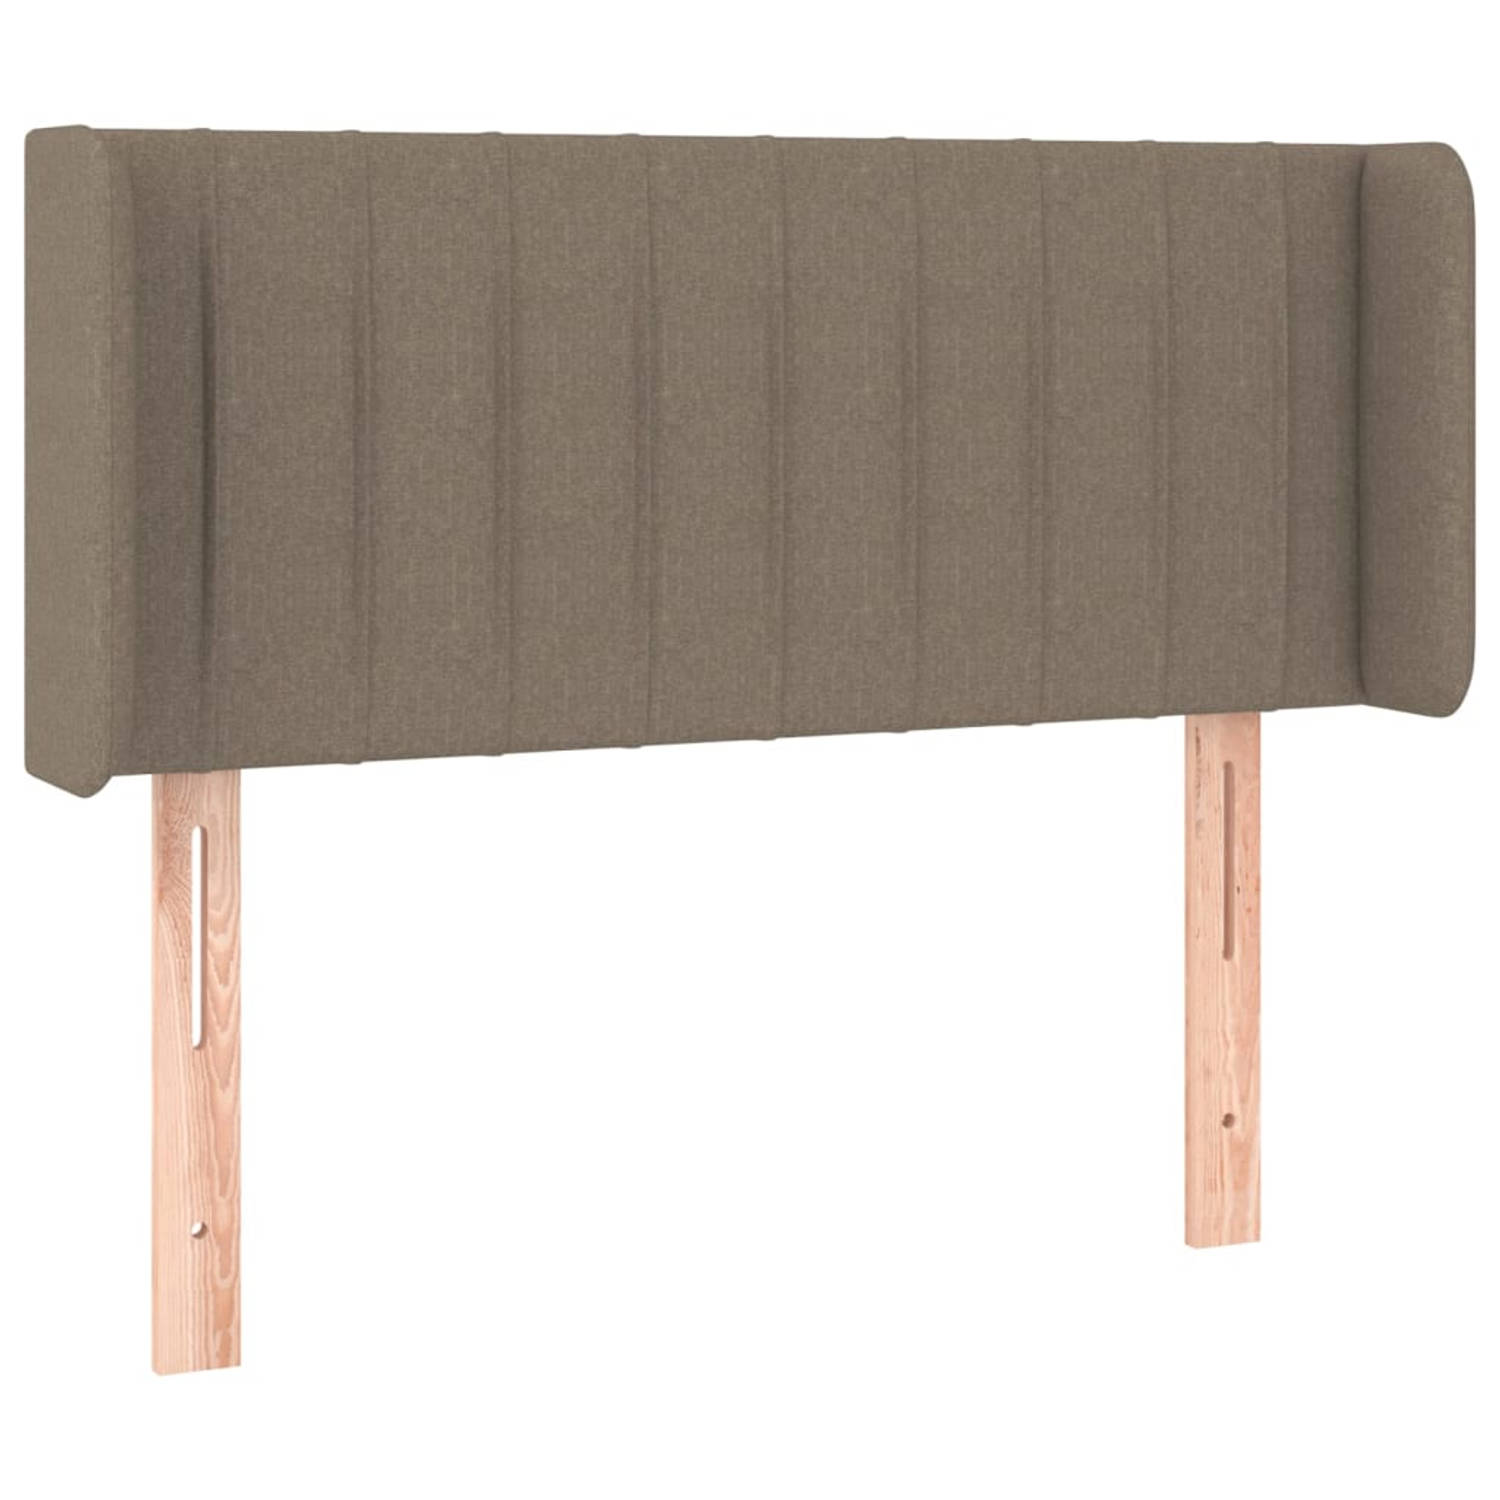 The Living Store Hoofdbord Bedombouw - 93 x 16 x 78/88 cm - Taupe